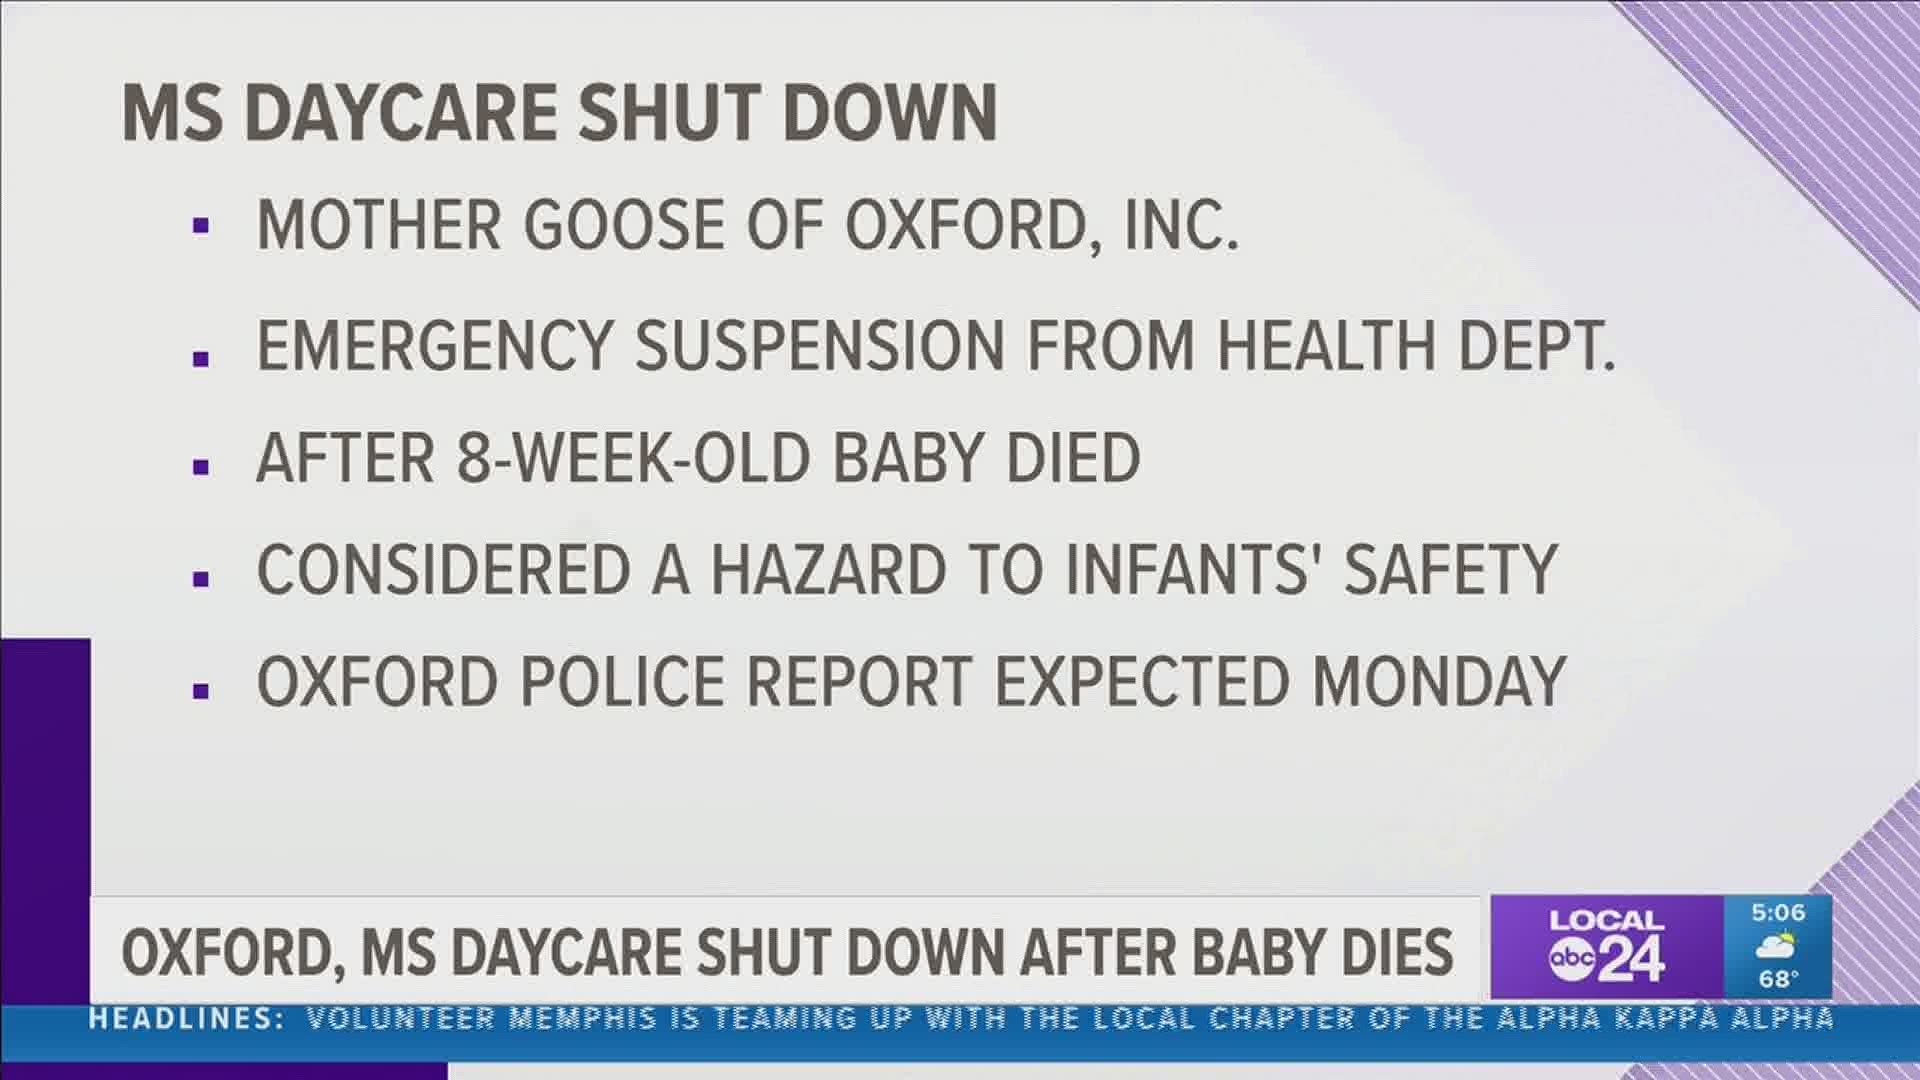 The Mississippi State Department of Health served an emergency suspension to "Mother Goose of Oxford."